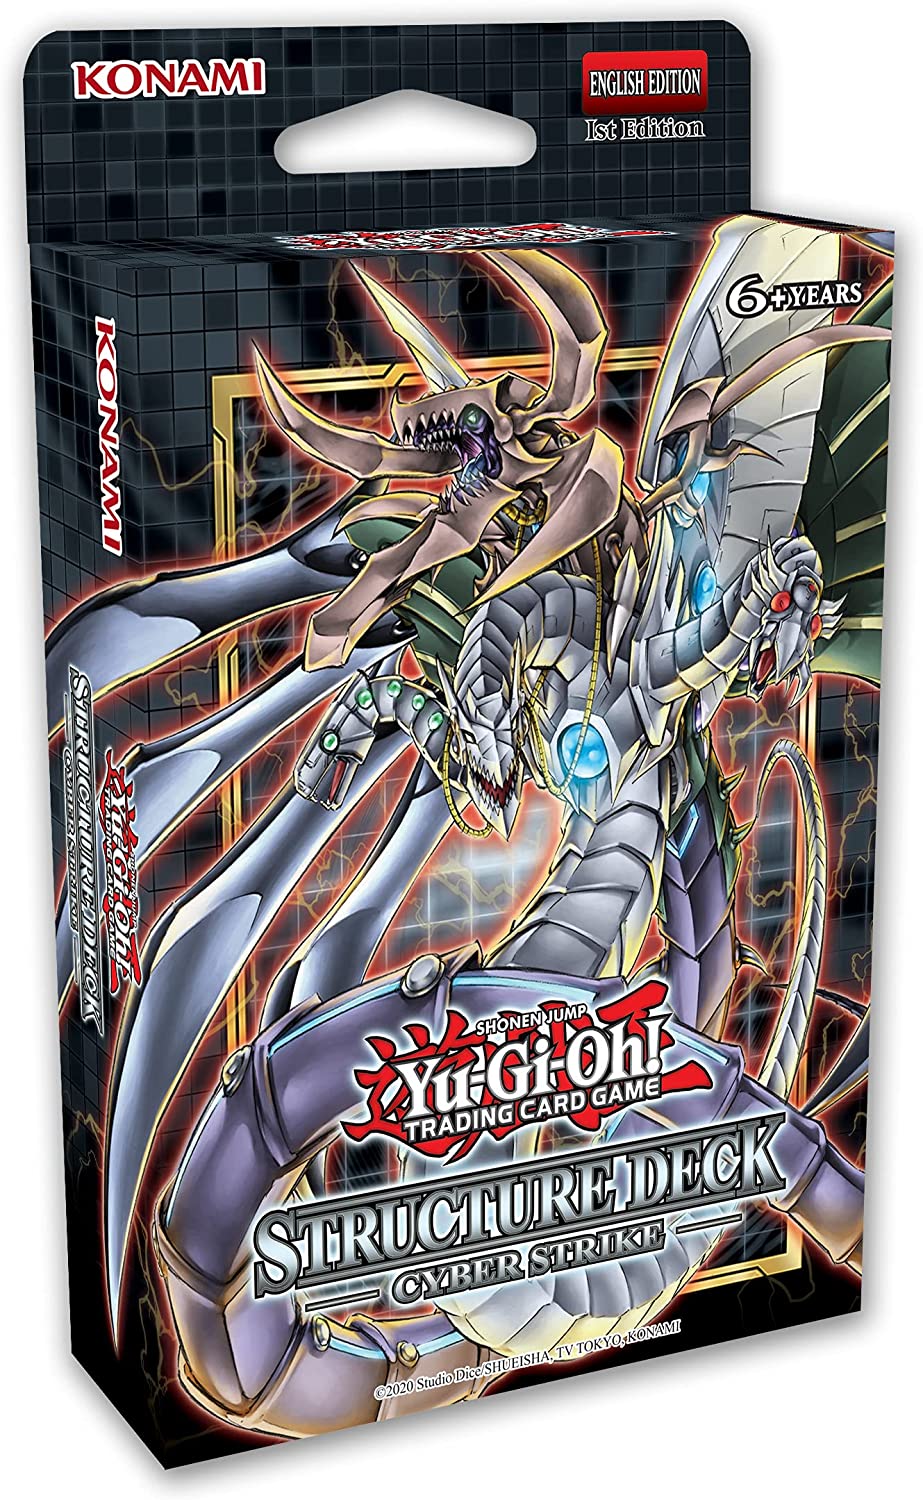 YU-GI-OH! Structure Deck: Cyber Strike Unlimited Reprint